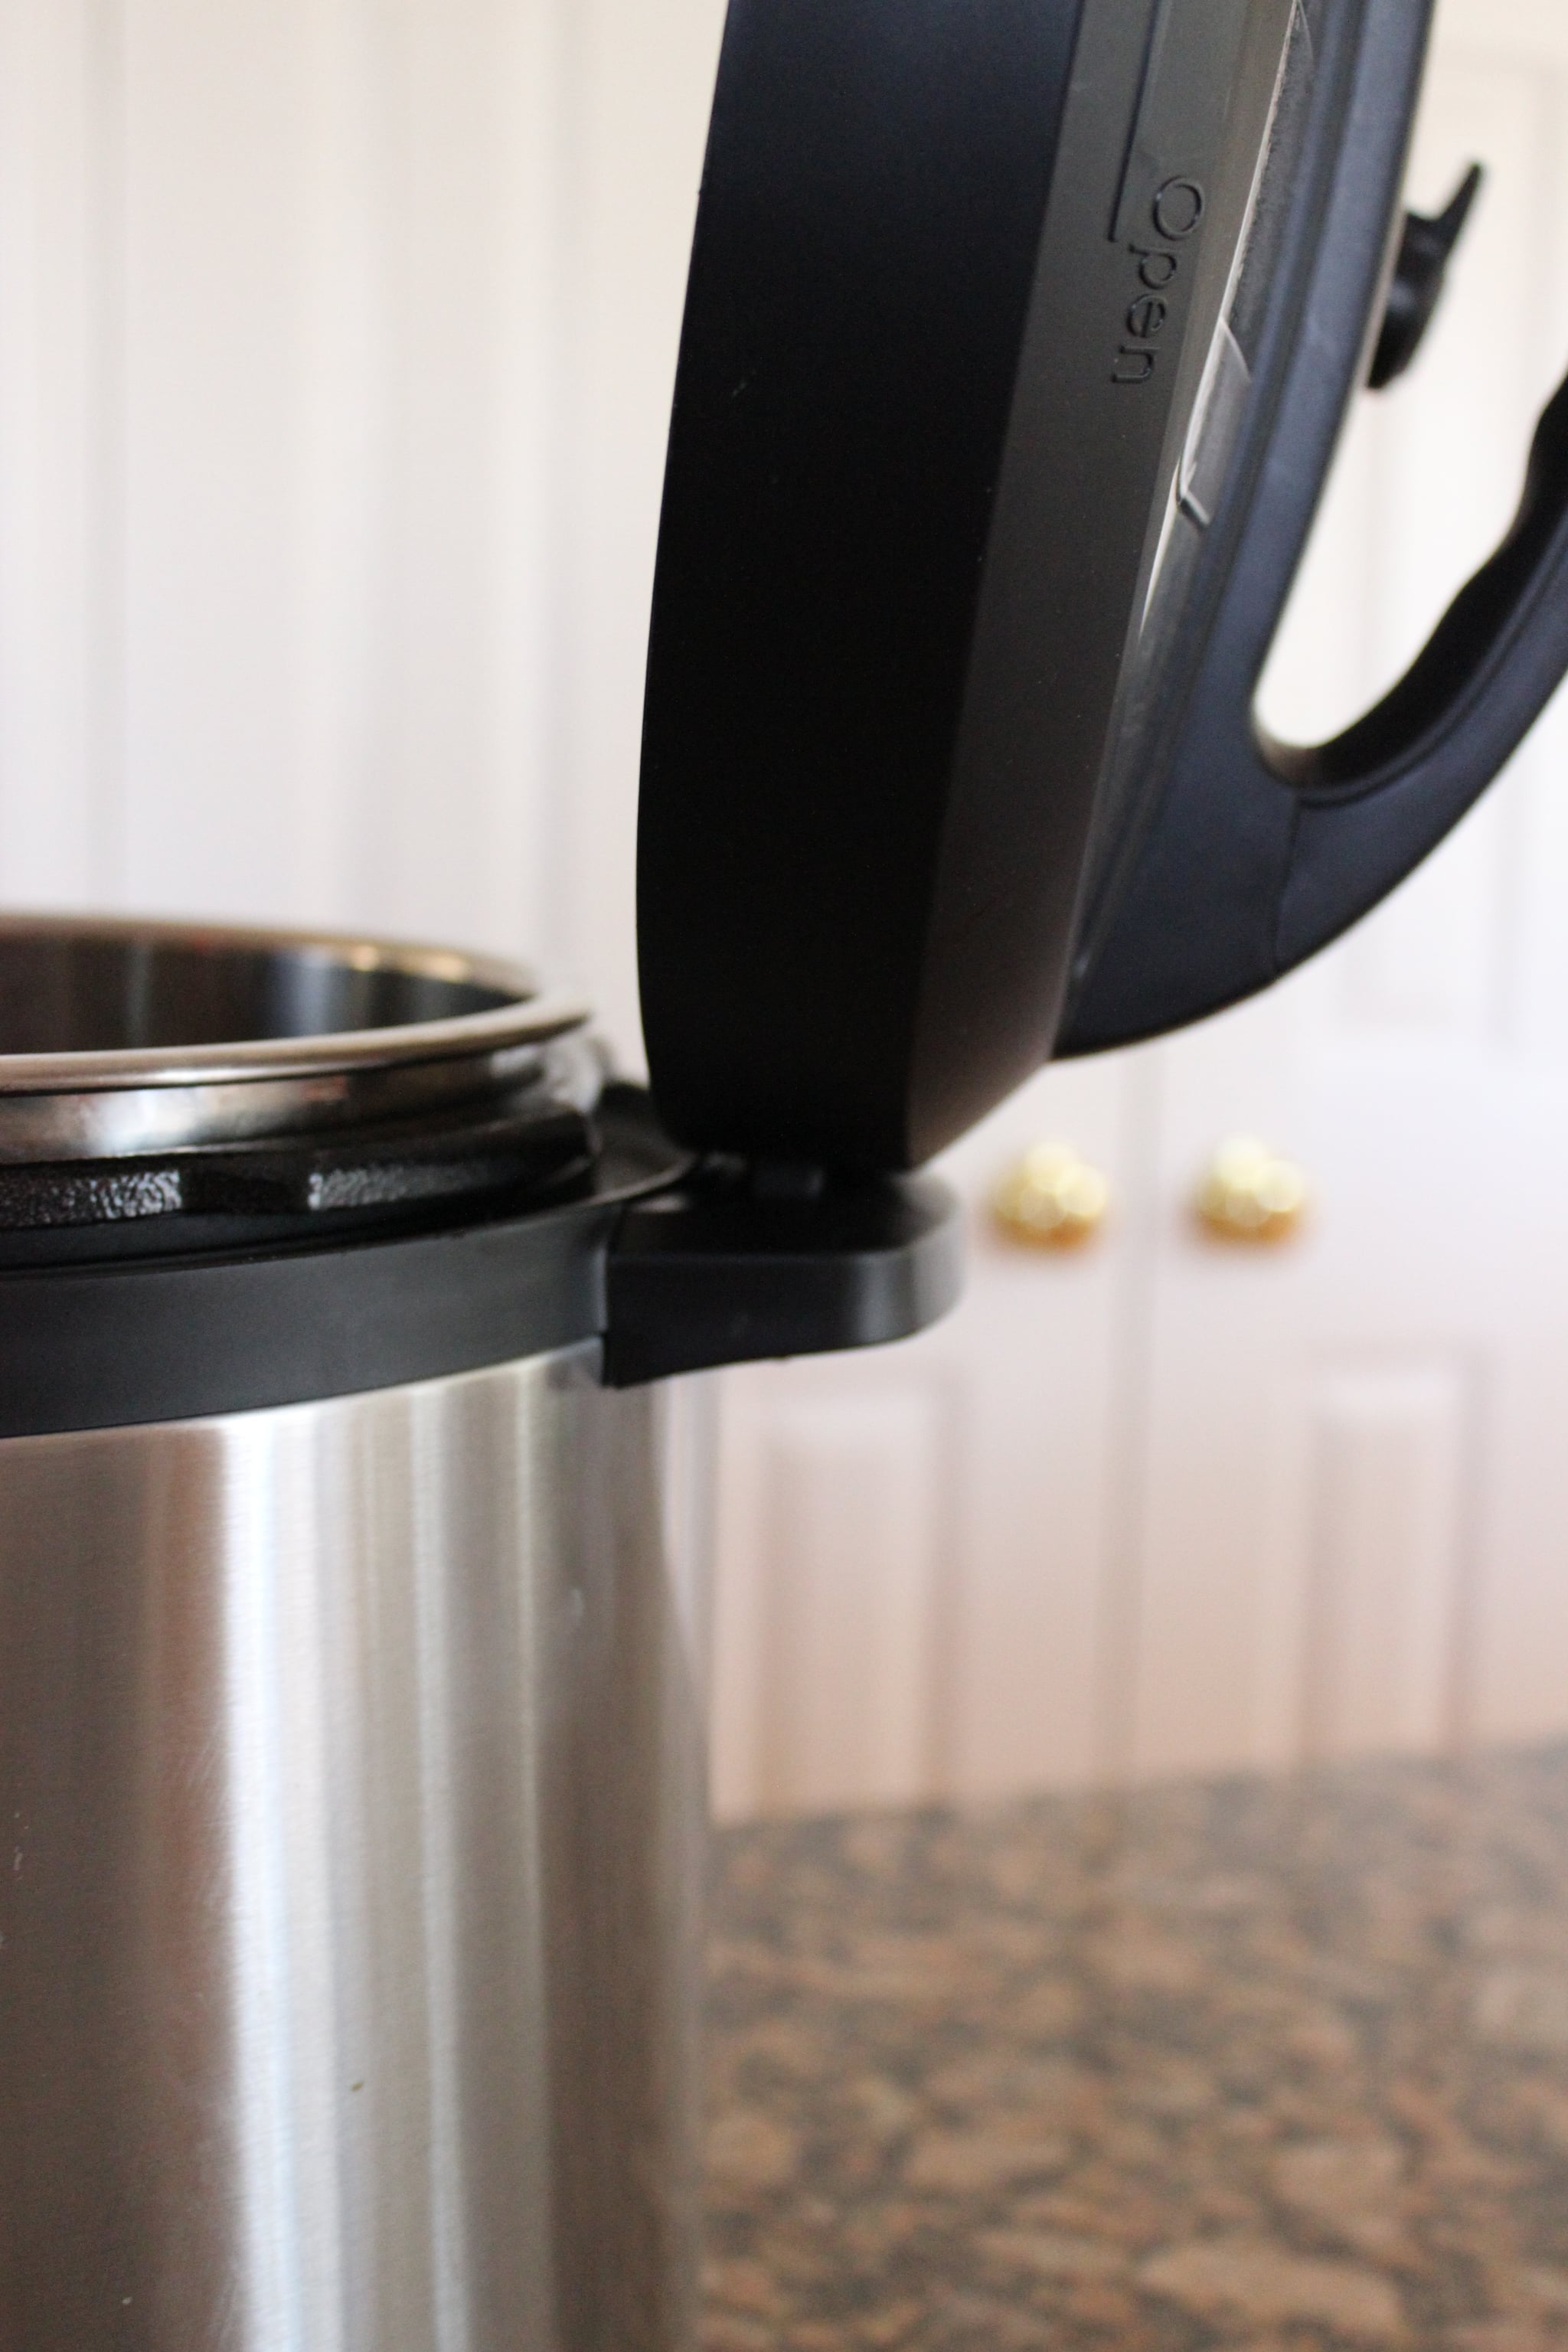 Your Instant Pot Has a Built-in Lid Holder